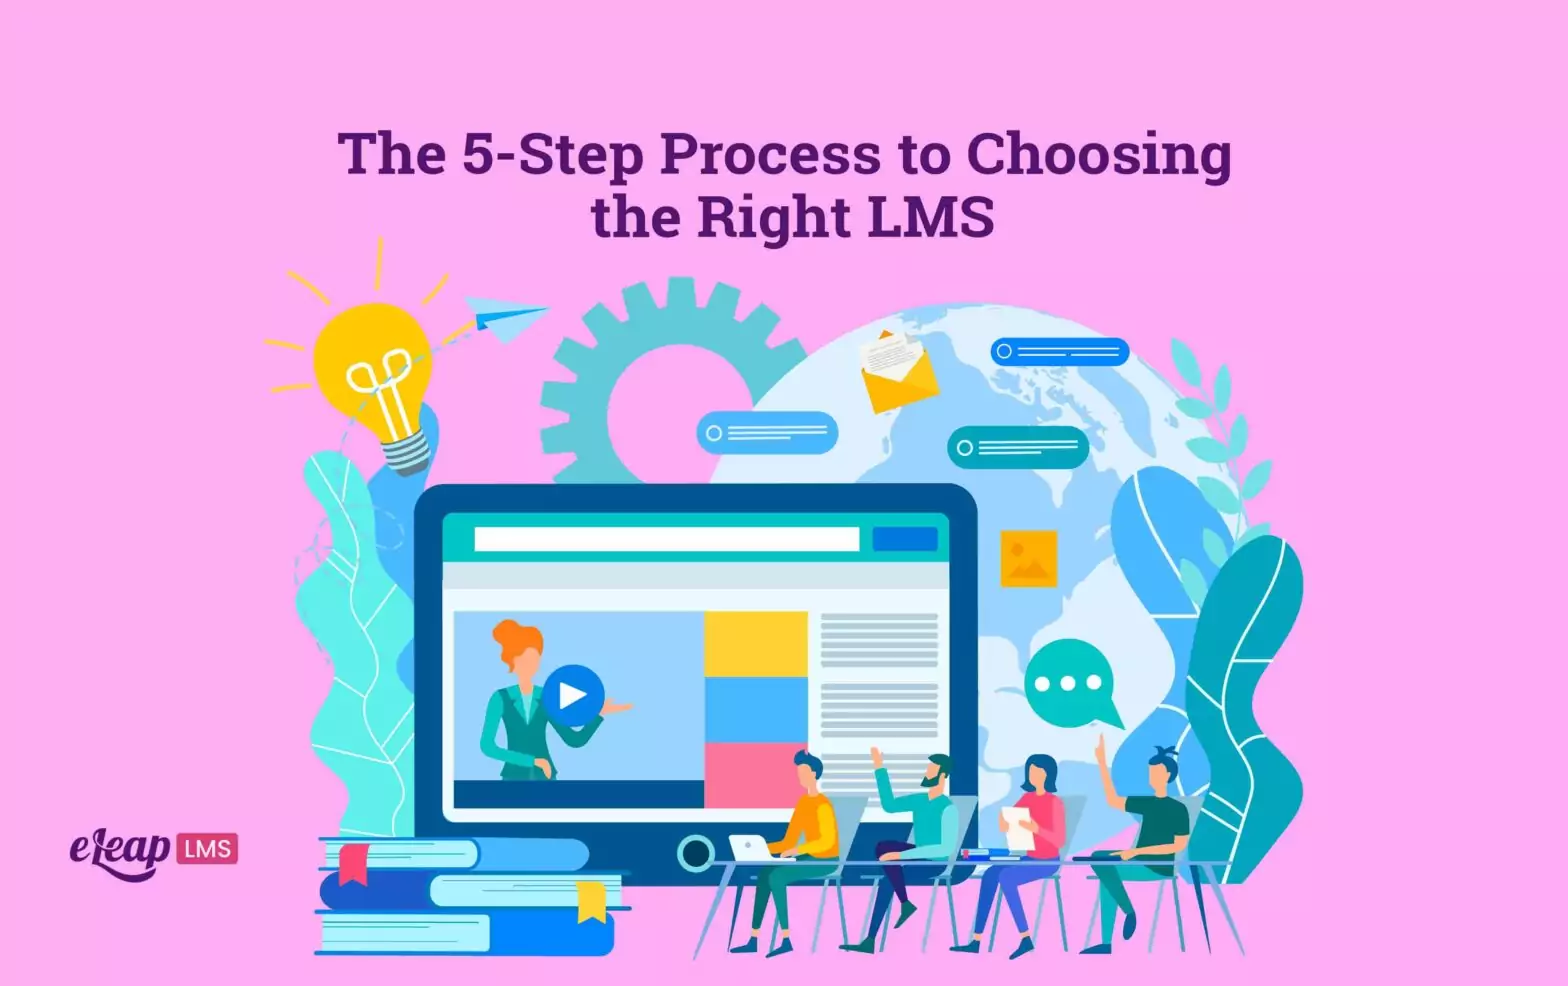 The 5-Step Process to Choosing the Right LMS